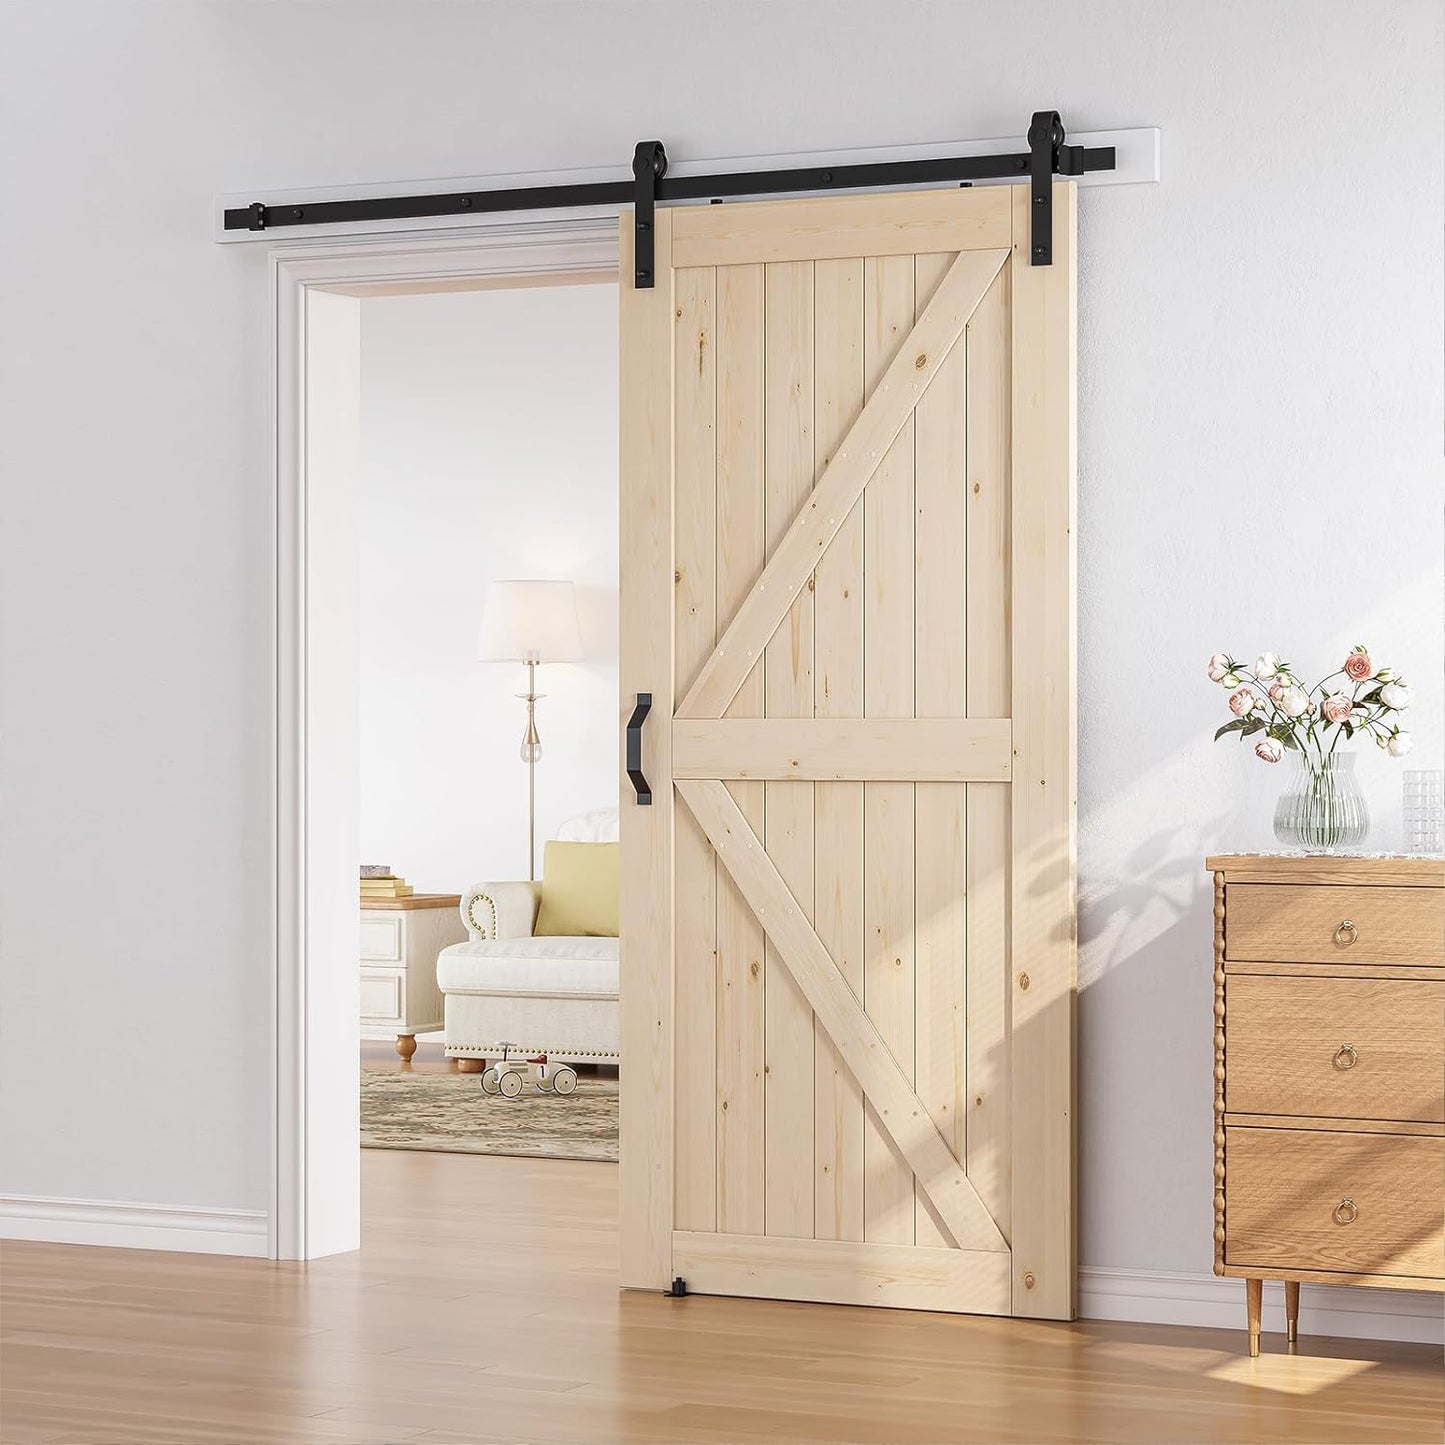 Unfinished Wood Barn Door with Installation Hardware KITE